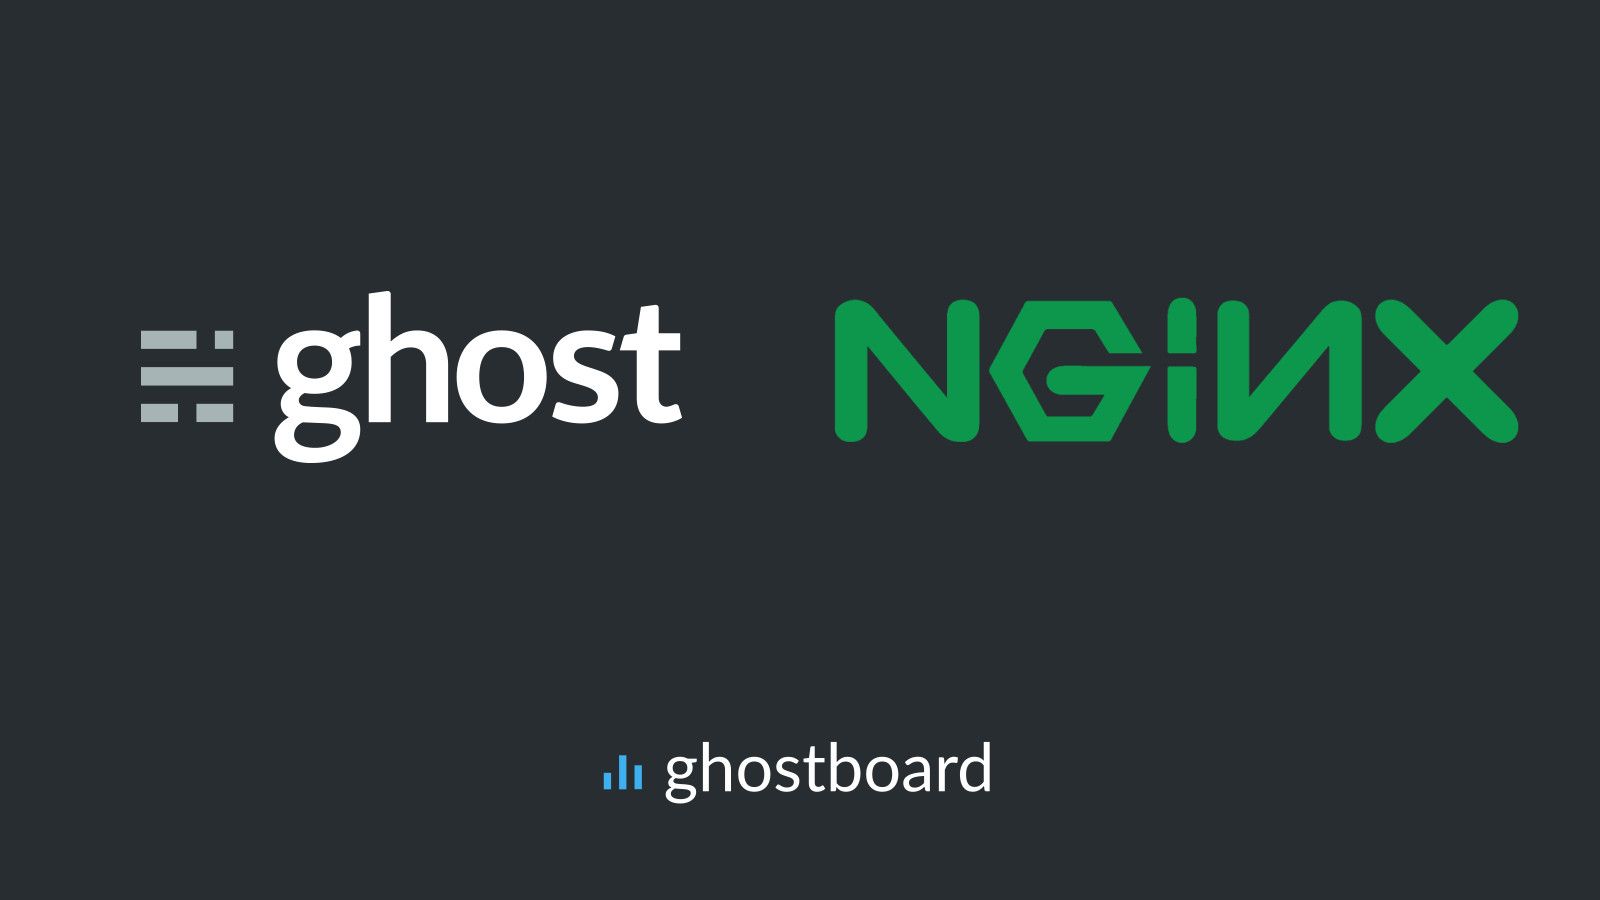 Ghost + NGINX: How to fix ERR_TOO_MANY_REDIRECTS error